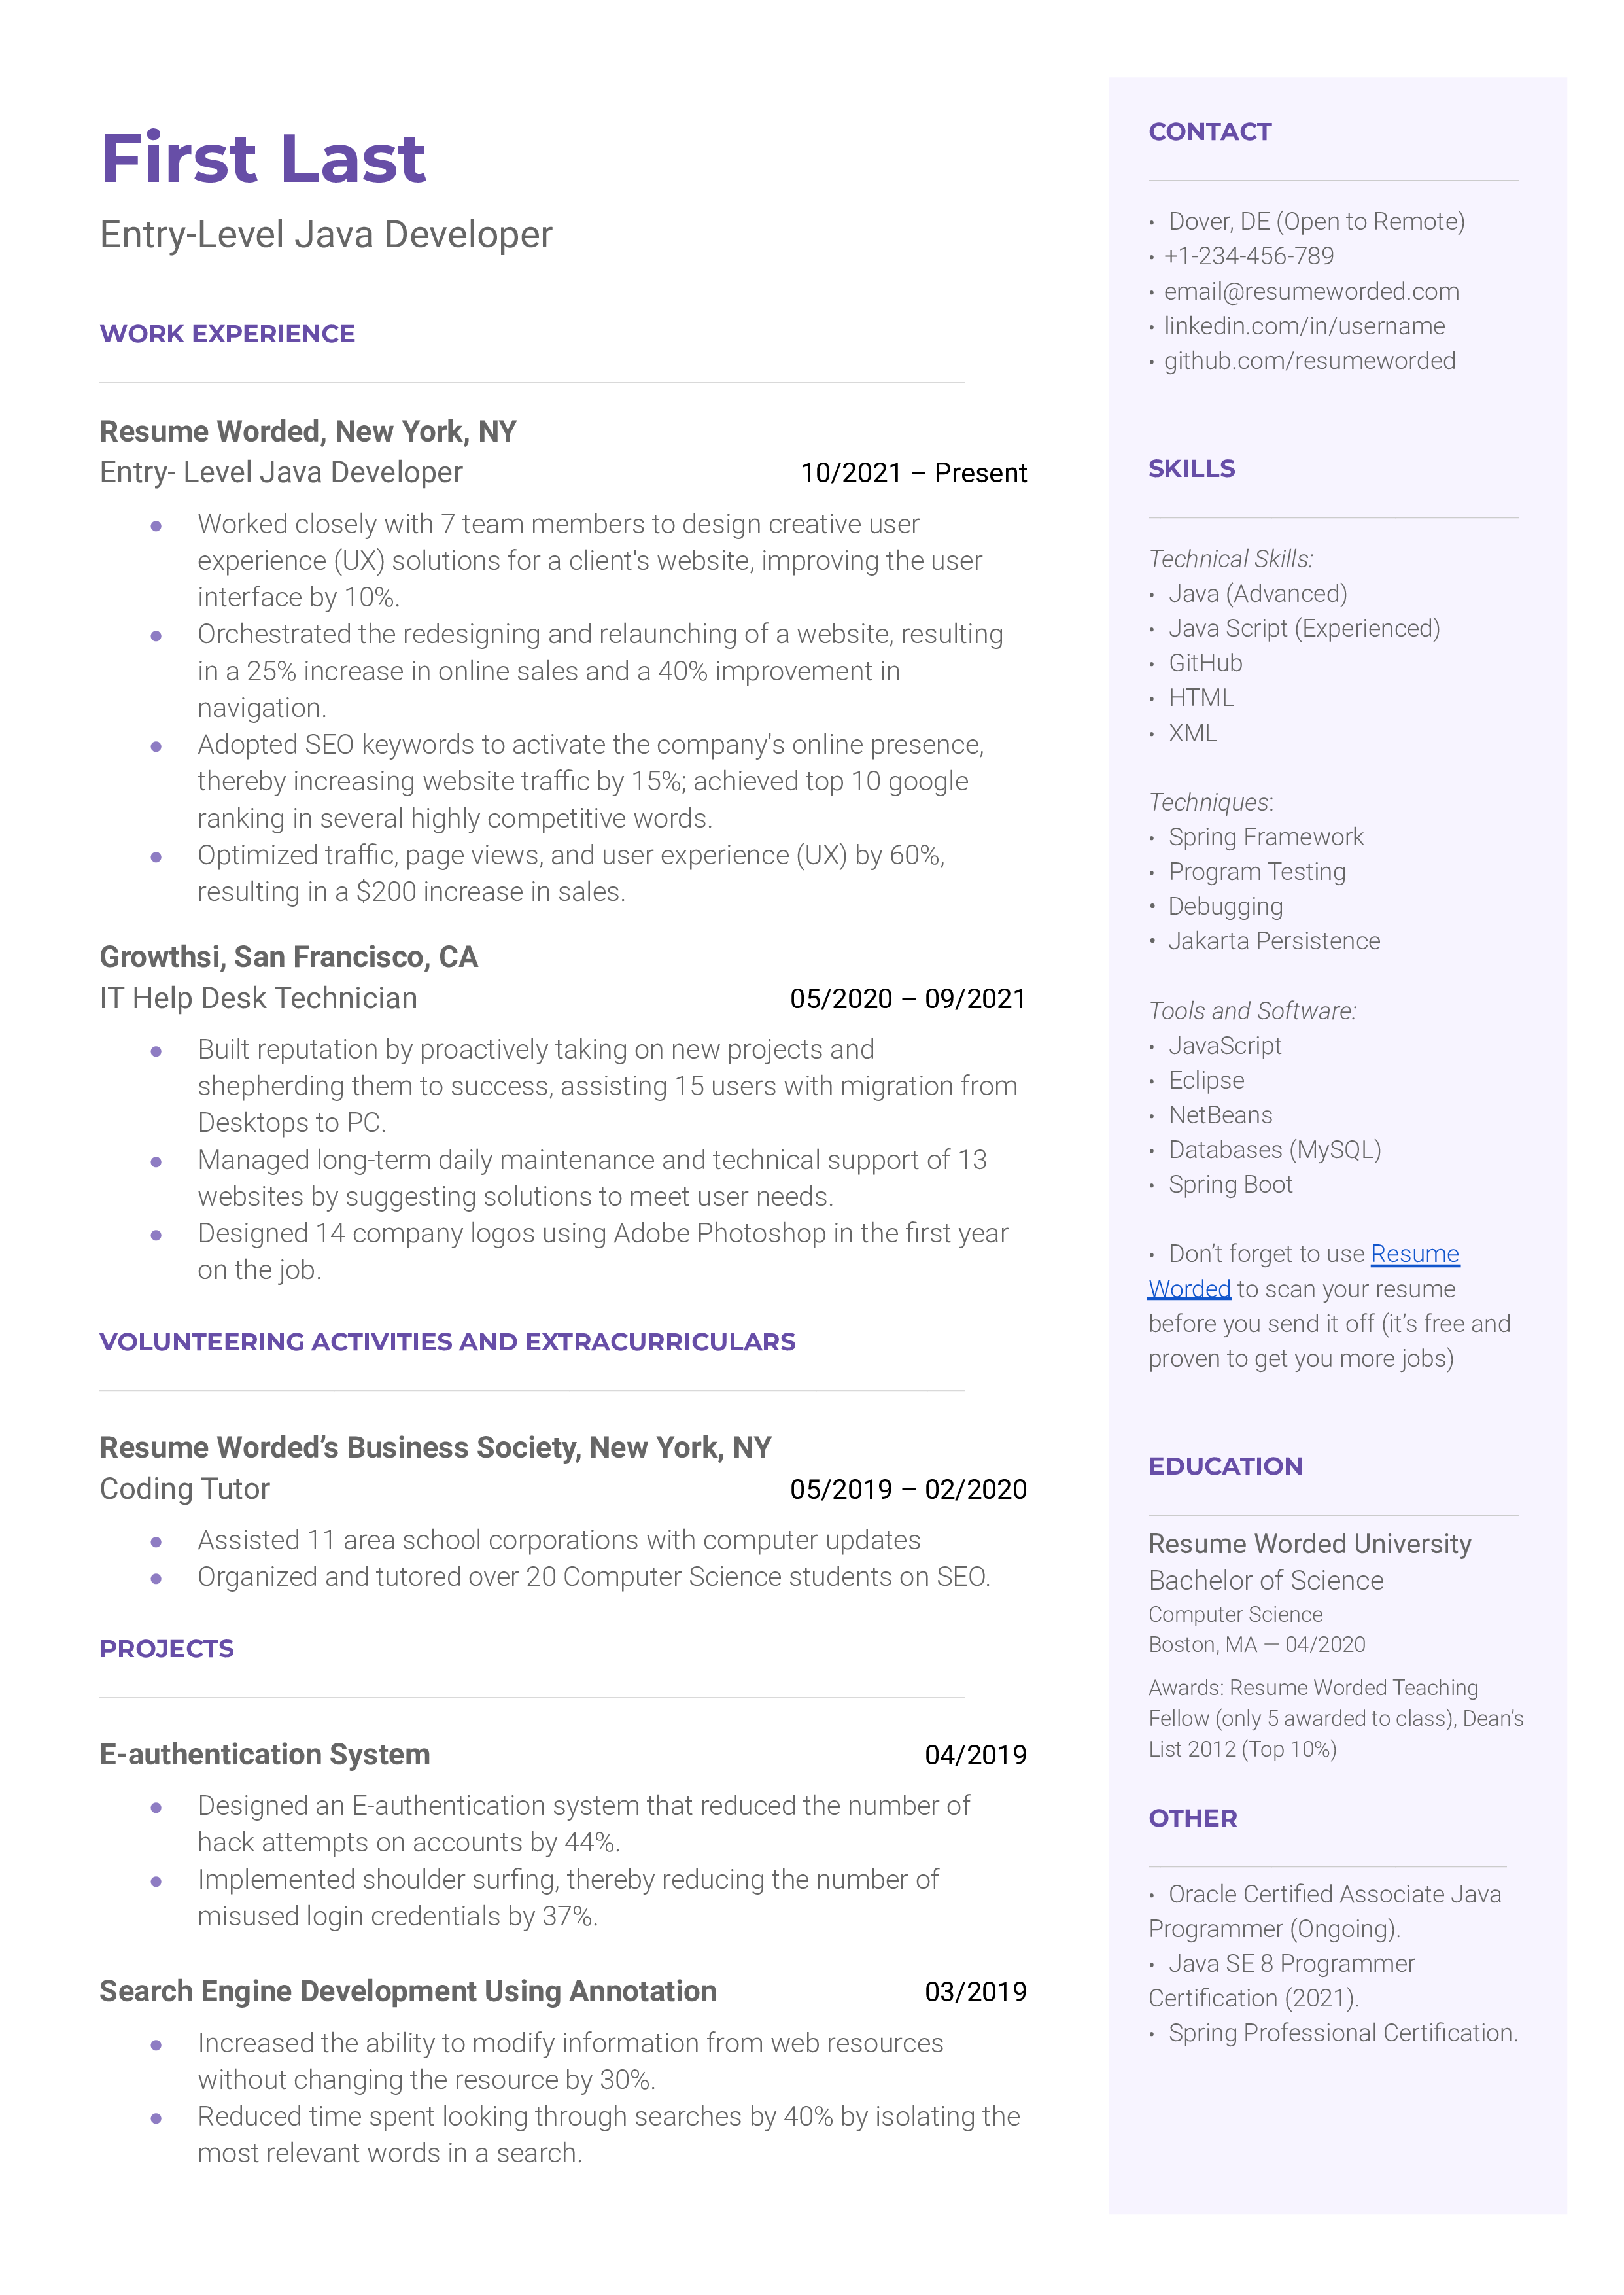 An entry-level Java developer resume sample that highlights the applicant’s developer qualifications and educational background.